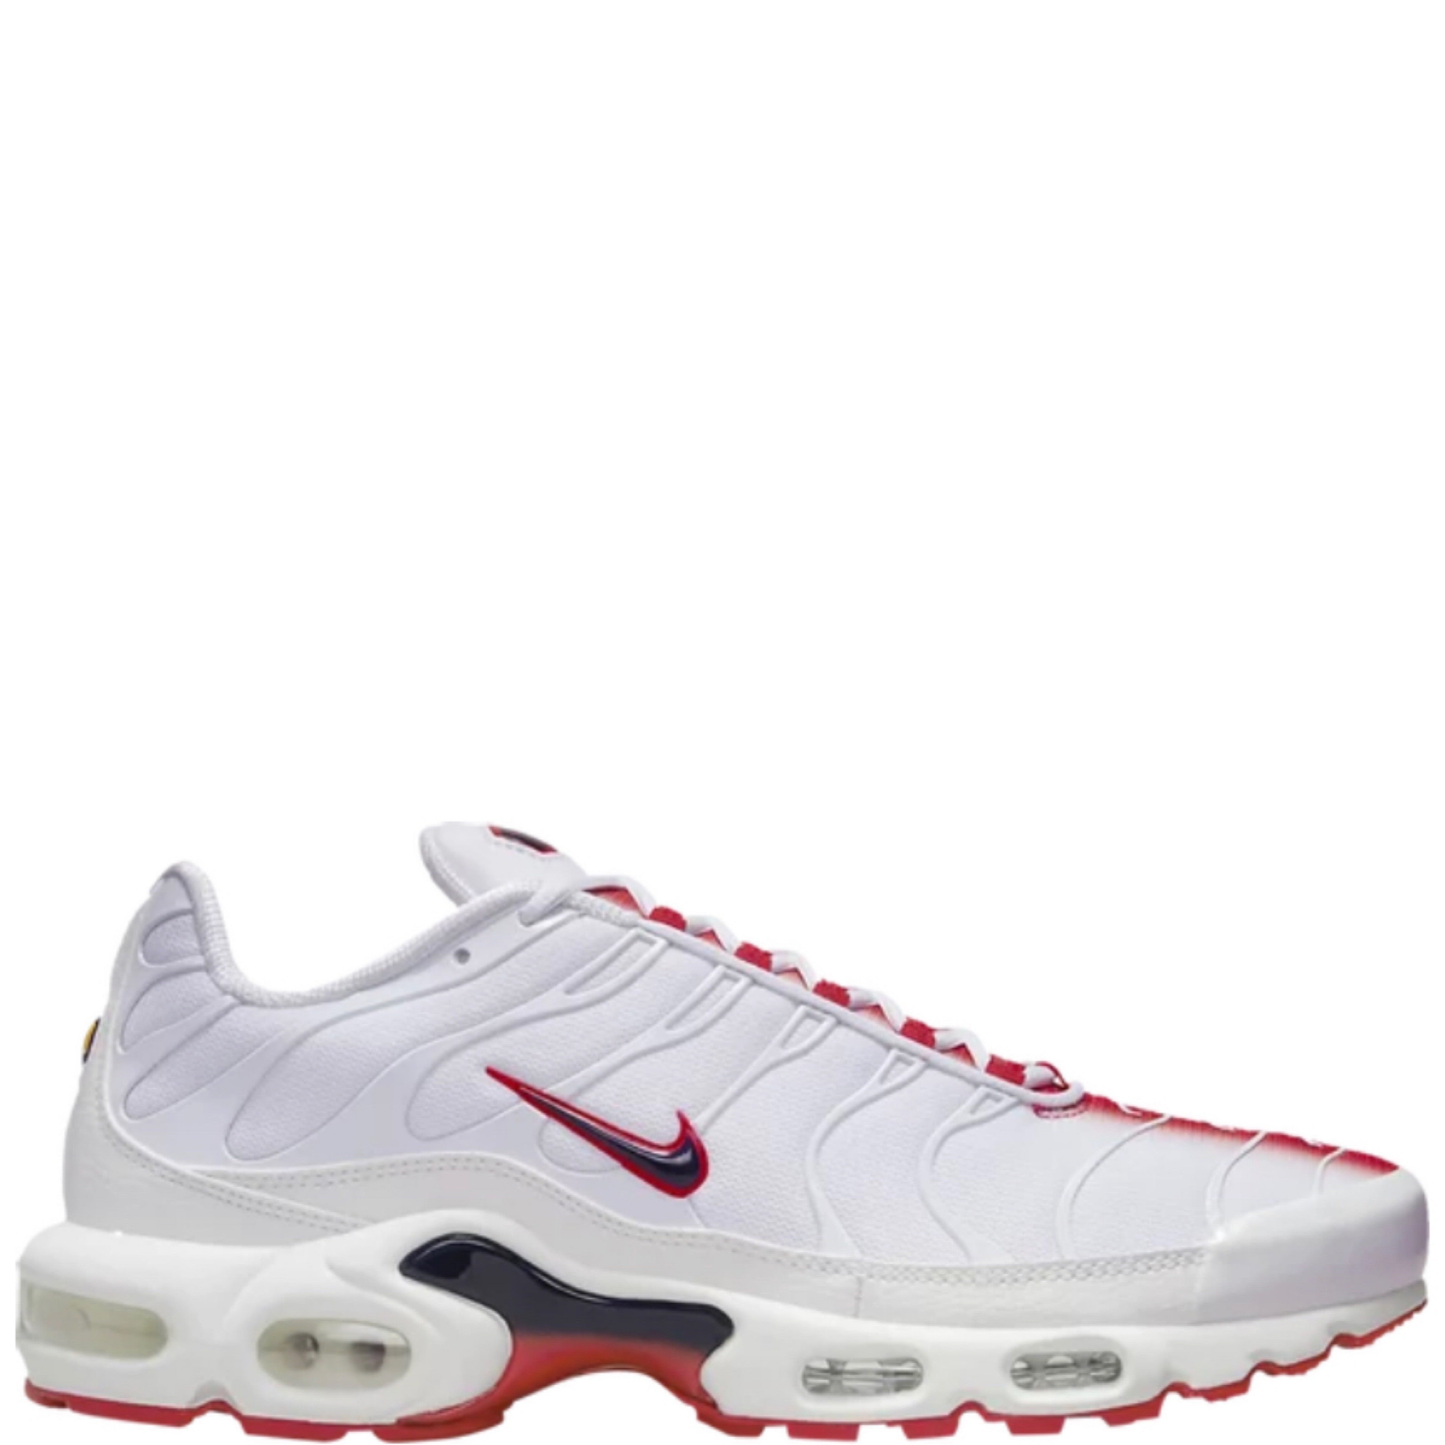 Air Max Plus Tuned White University Red - DANYOUNGUK